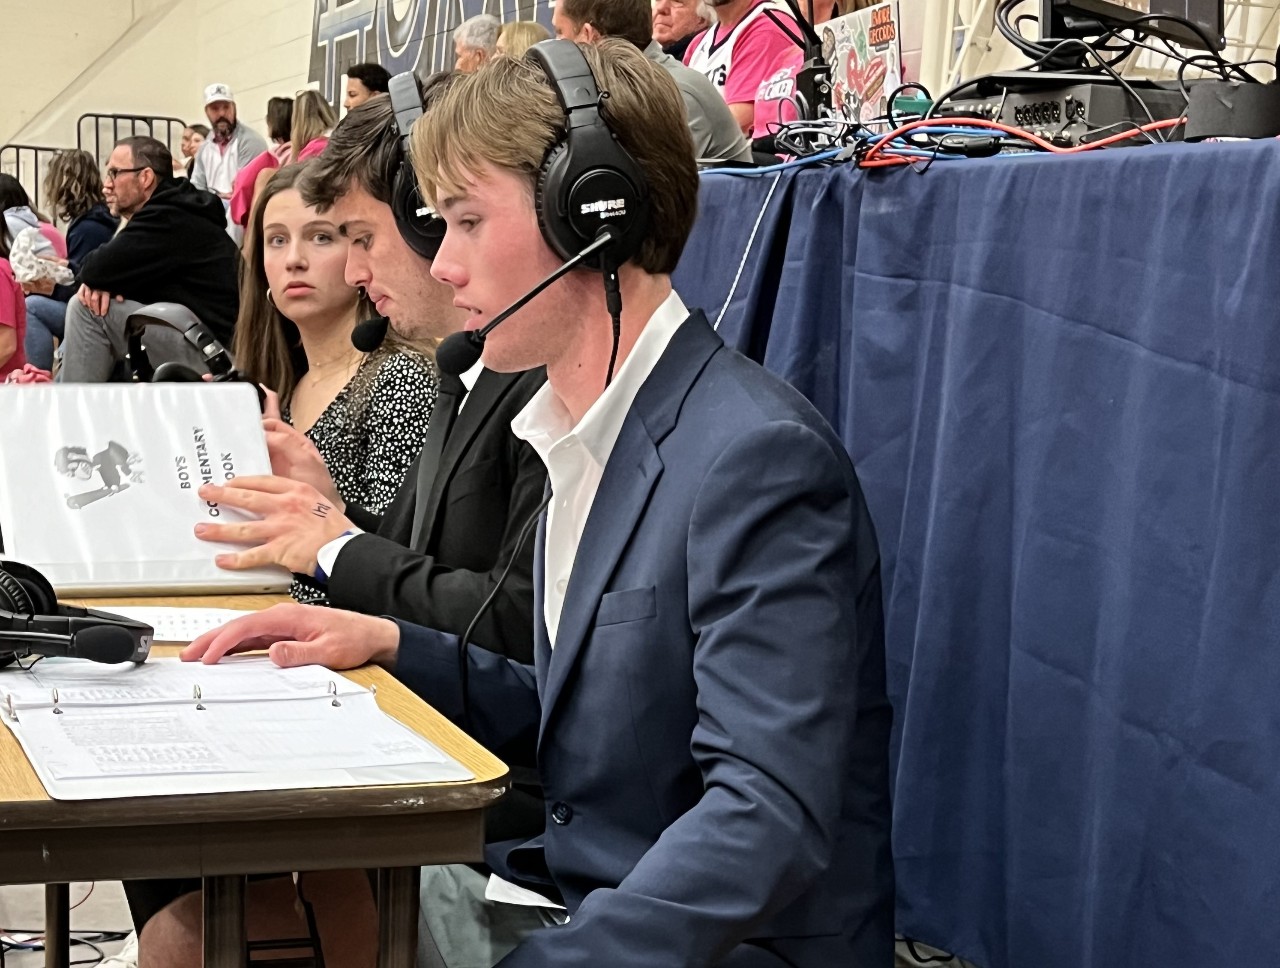 Broadcasting student provides live commentary at 1/31 Pinkout basketball game.